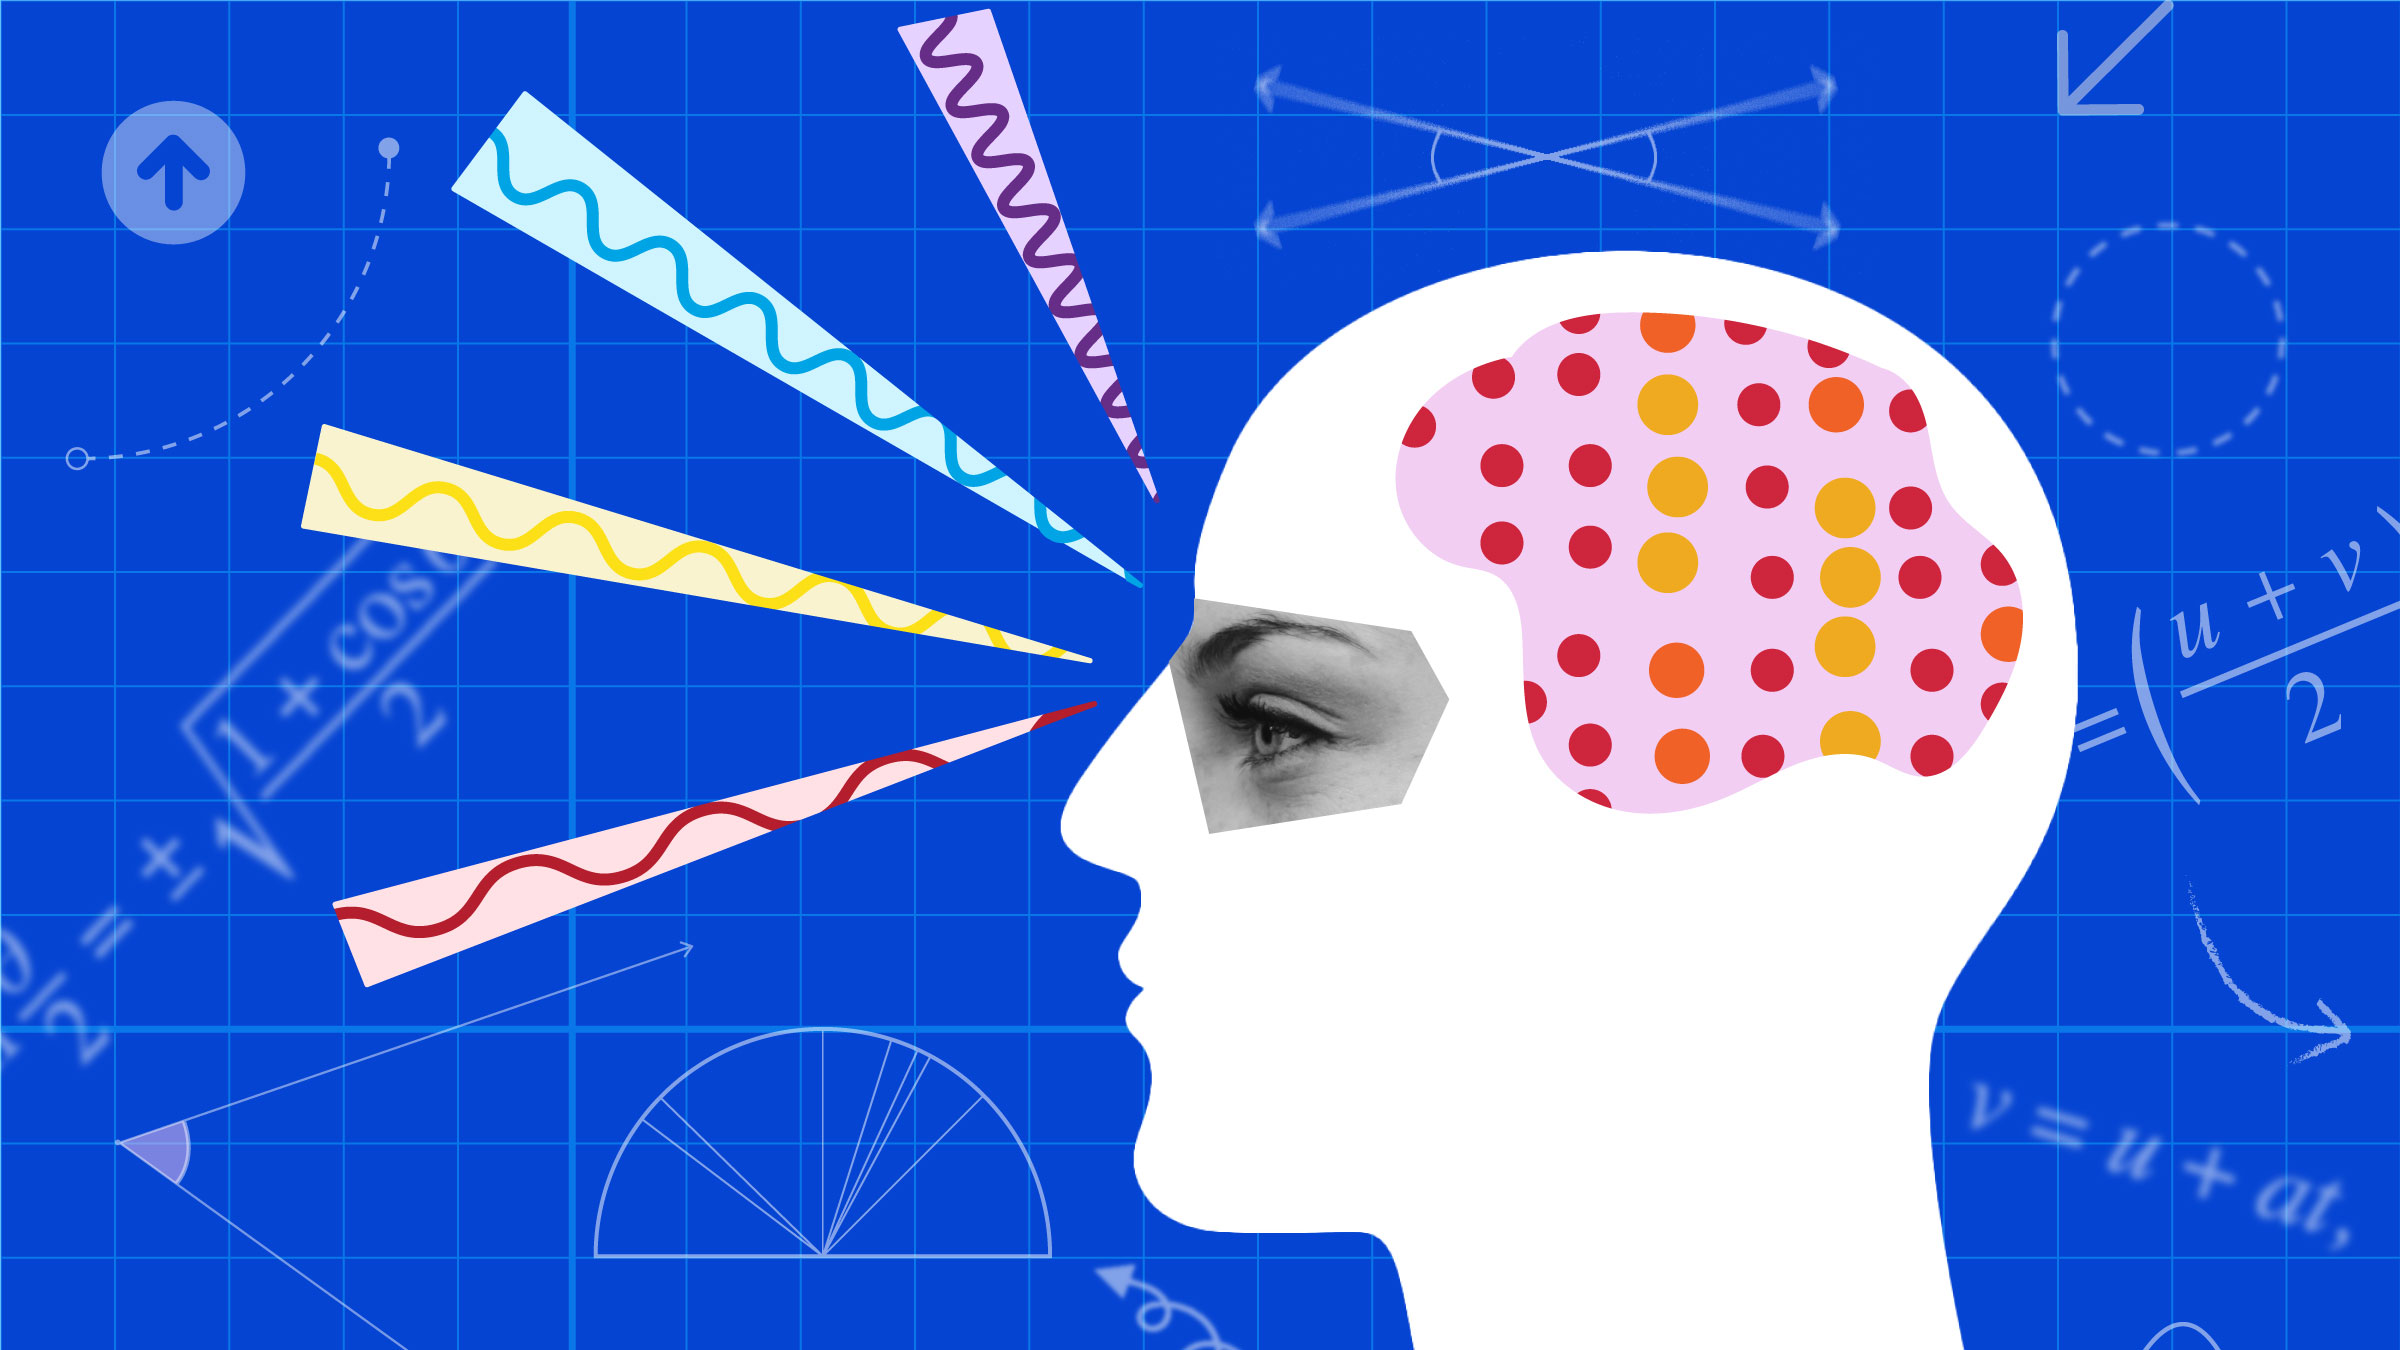 Artist drawing of human head in profile with blue background, colored lines pointing at the eye, colored dots representing the brain and math equations floating around the head.